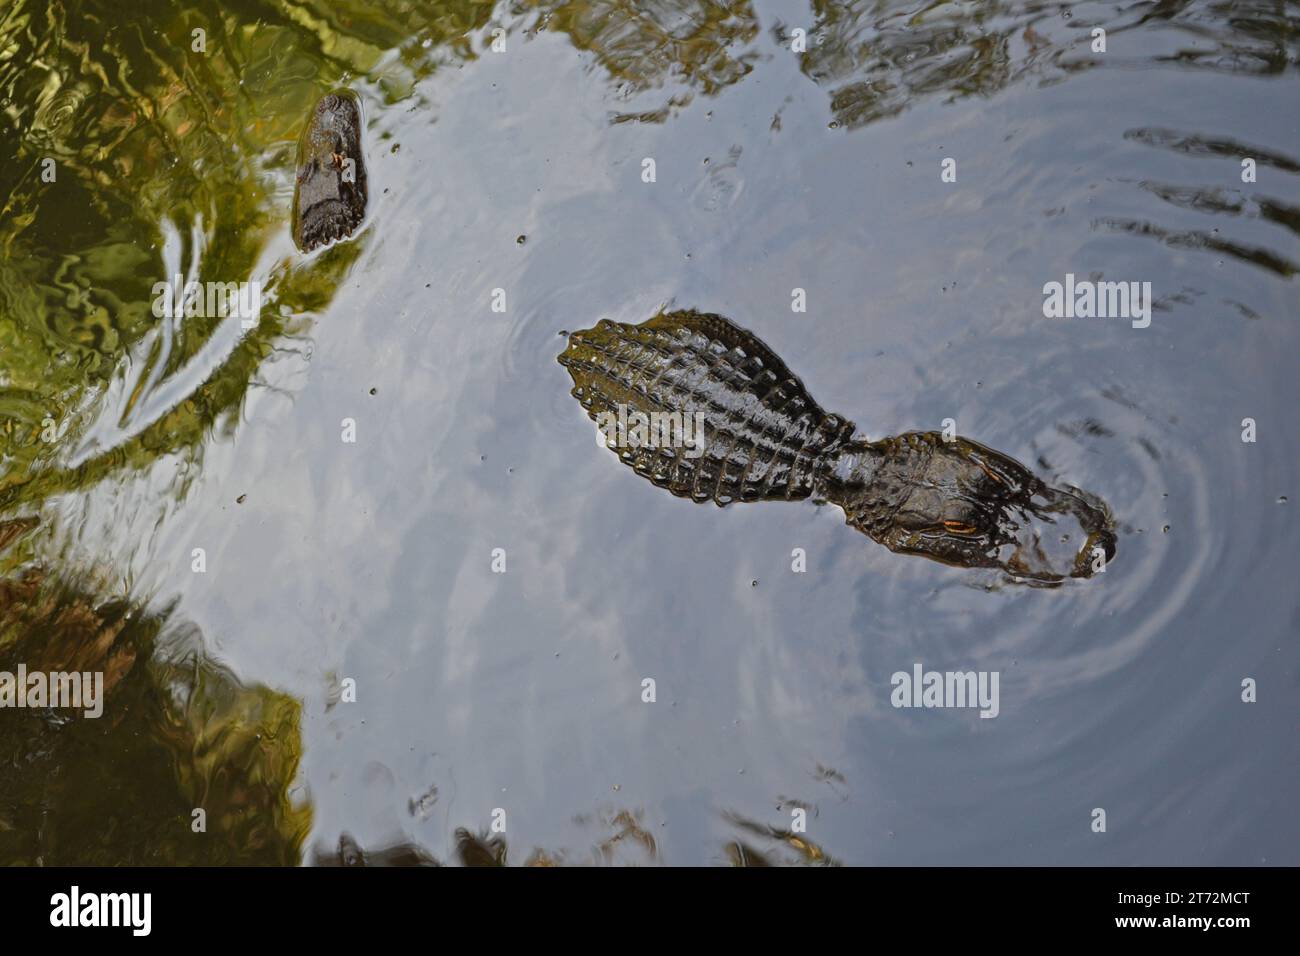 Two American alligators resting in the swamp. Stock Photo